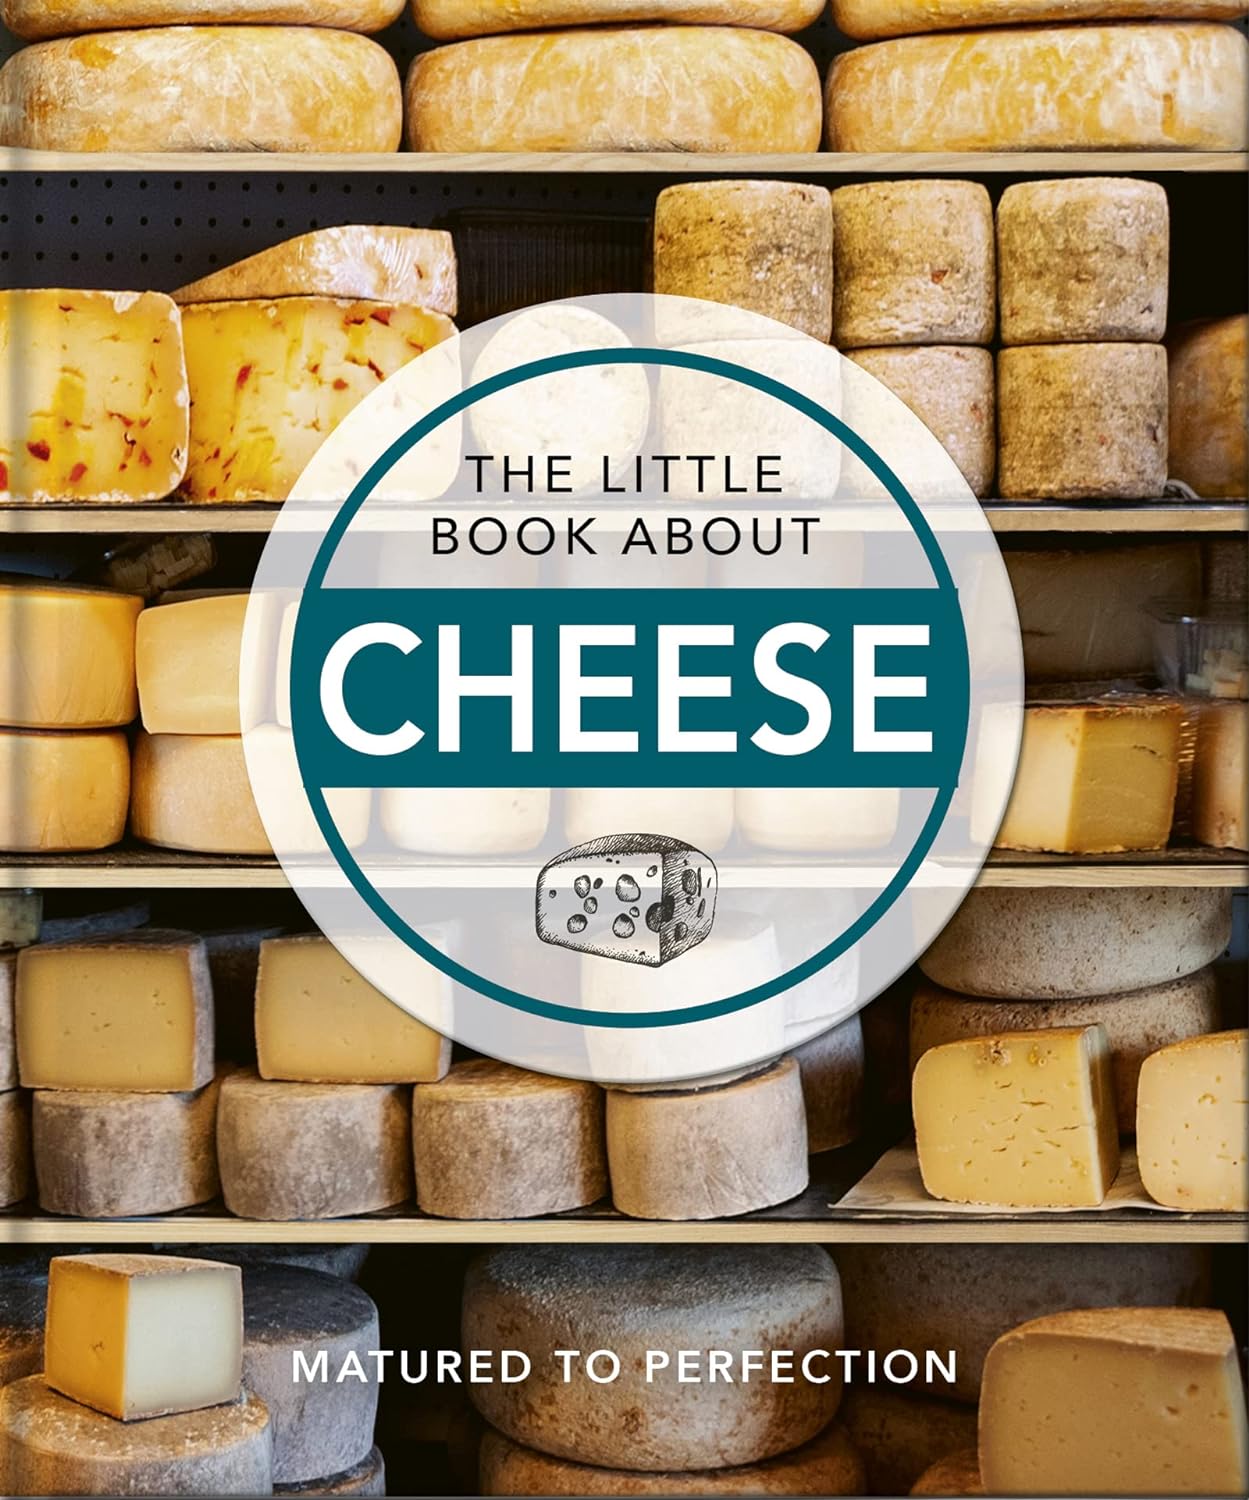 THE LITTLE BOOK ABOUT CHEESE